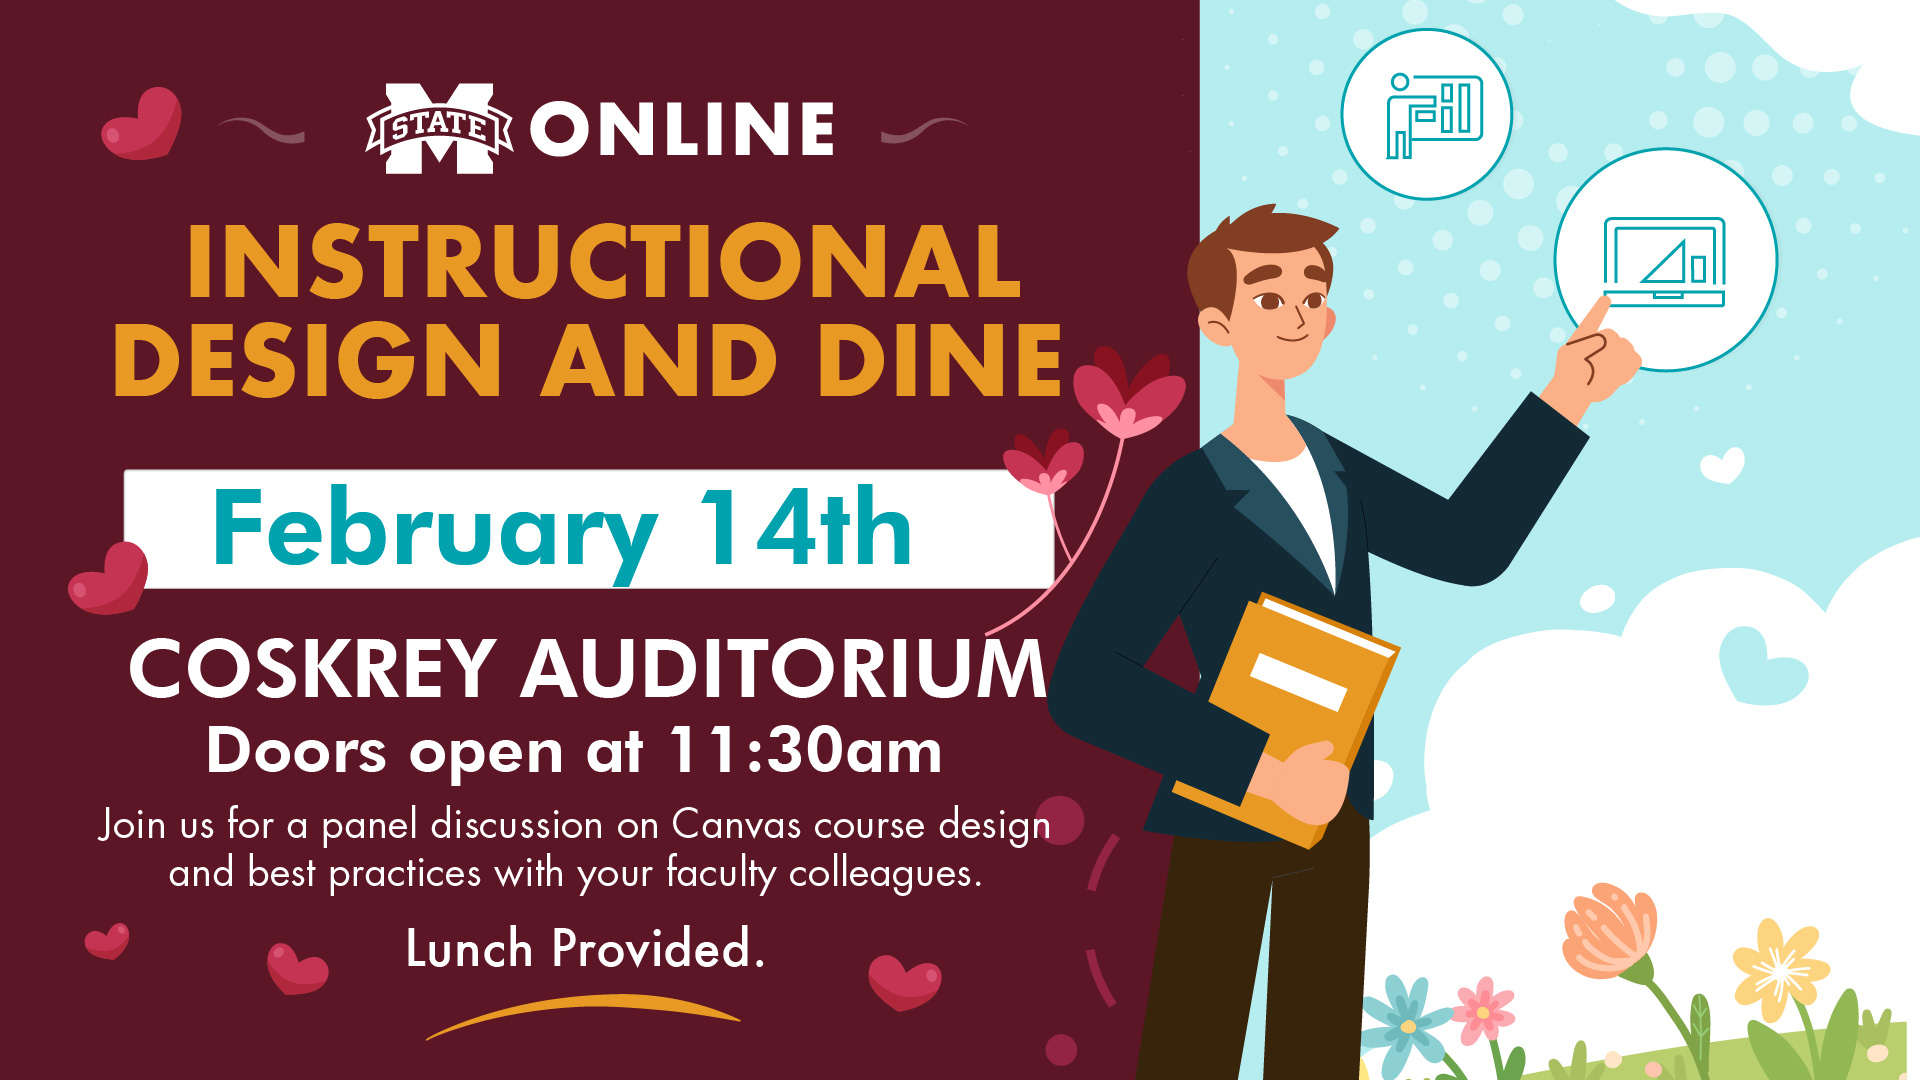 Instructional Design and Dine in Coskrey Auditorium on Febuary 14th. Doors open at 11:30am and lunch is provided.